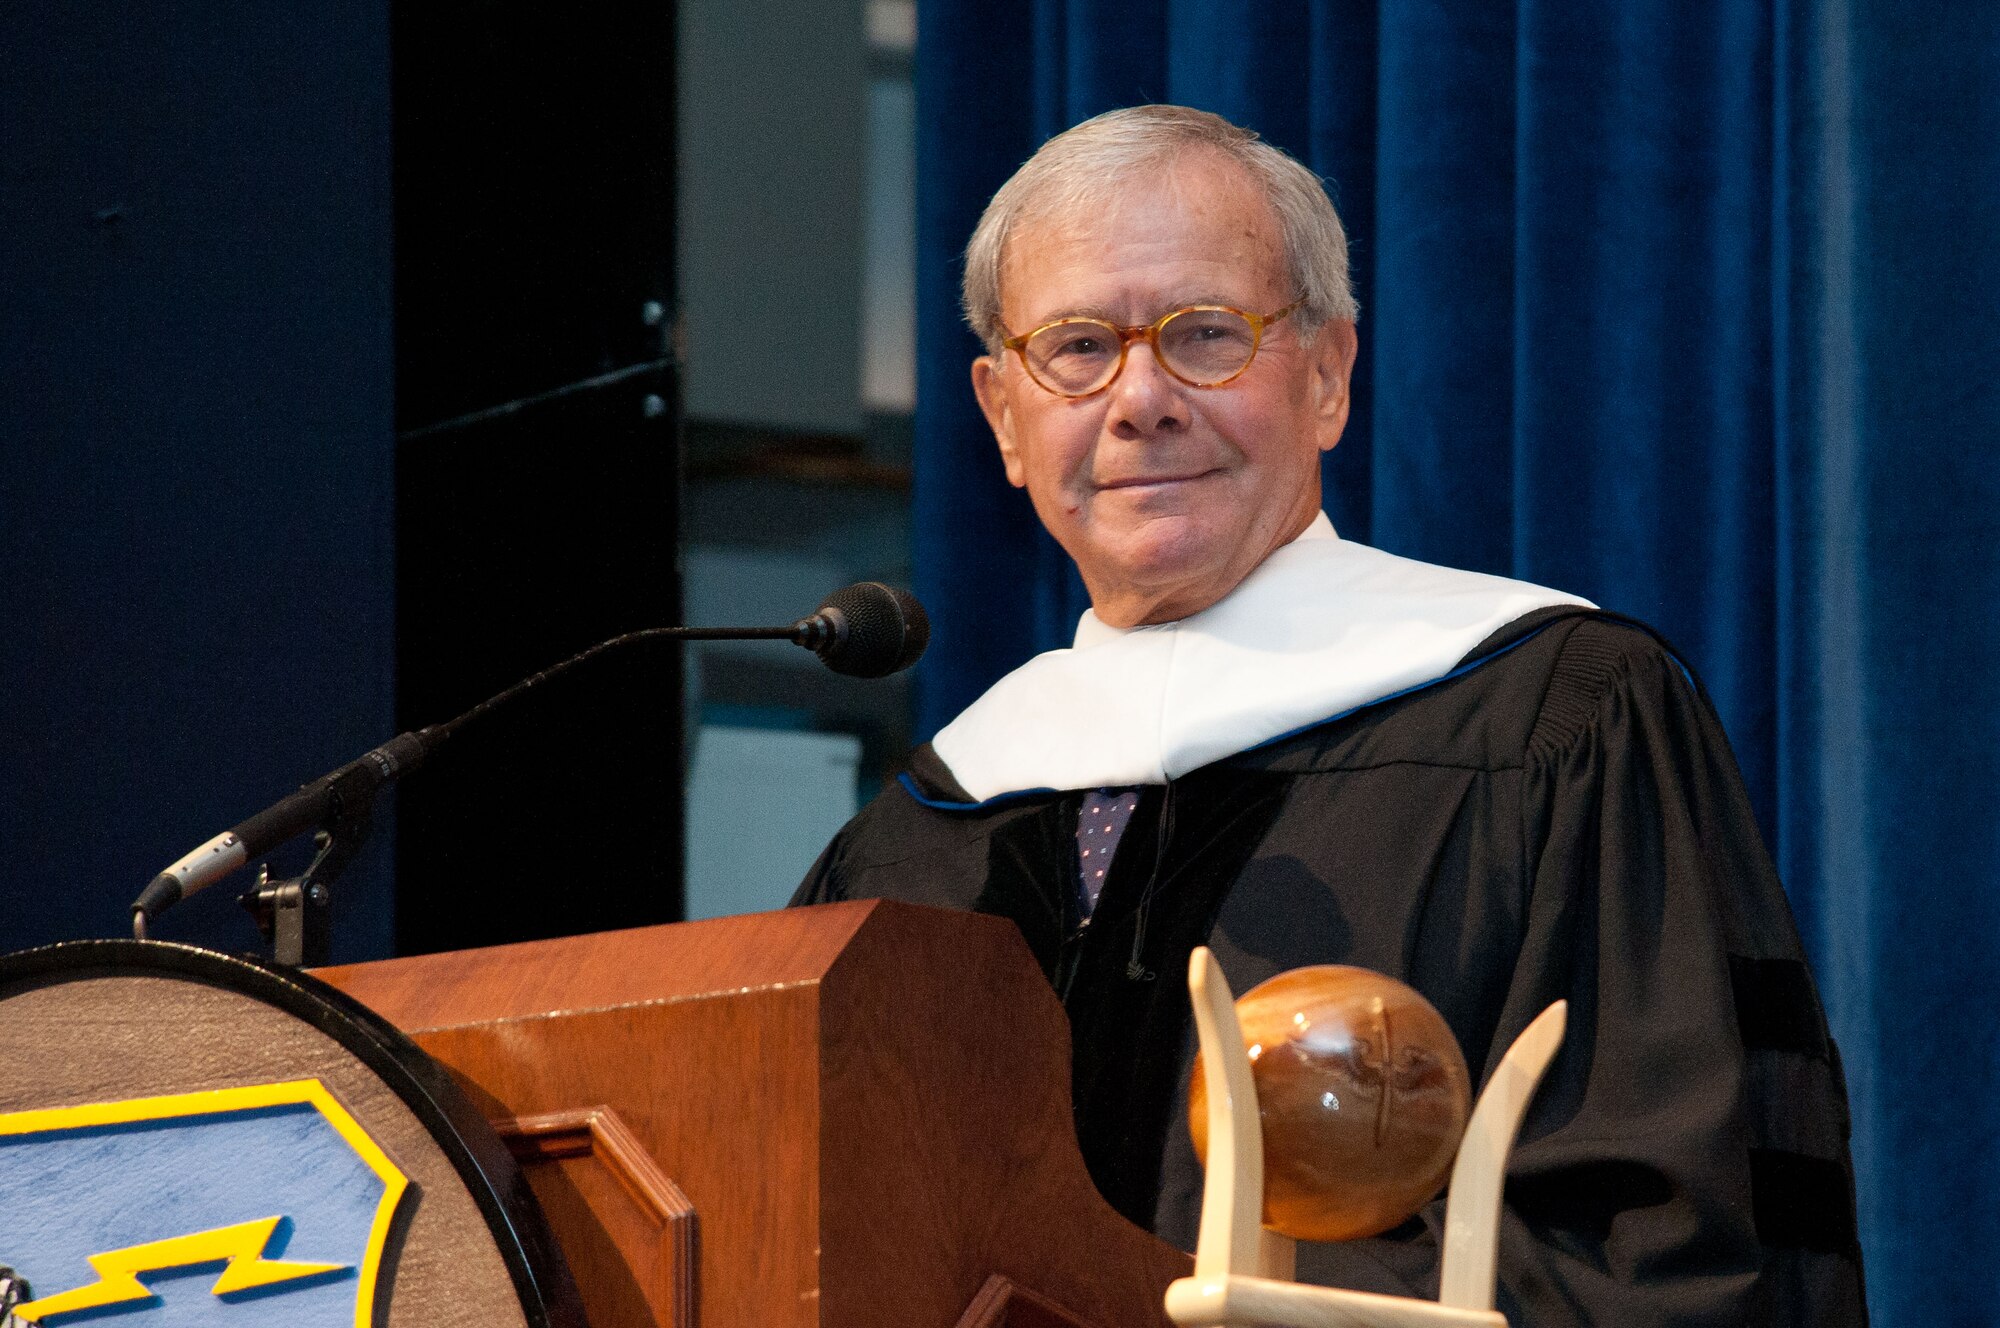 Tom Brokaw speaks during a honorary degree ceremony held Monday. Lt. Gen. David Fadok, commander and president of the Air University, Dr. Bruce Murphy, vice president for academic affairs, and Dr. Jack Hawkins, chair of the AU Board of Visitors, presented Tom Brokaw with a hood and diploma recognizing his honorary Doctor of Letters degree. (Air Force photo/Donna Burnett)